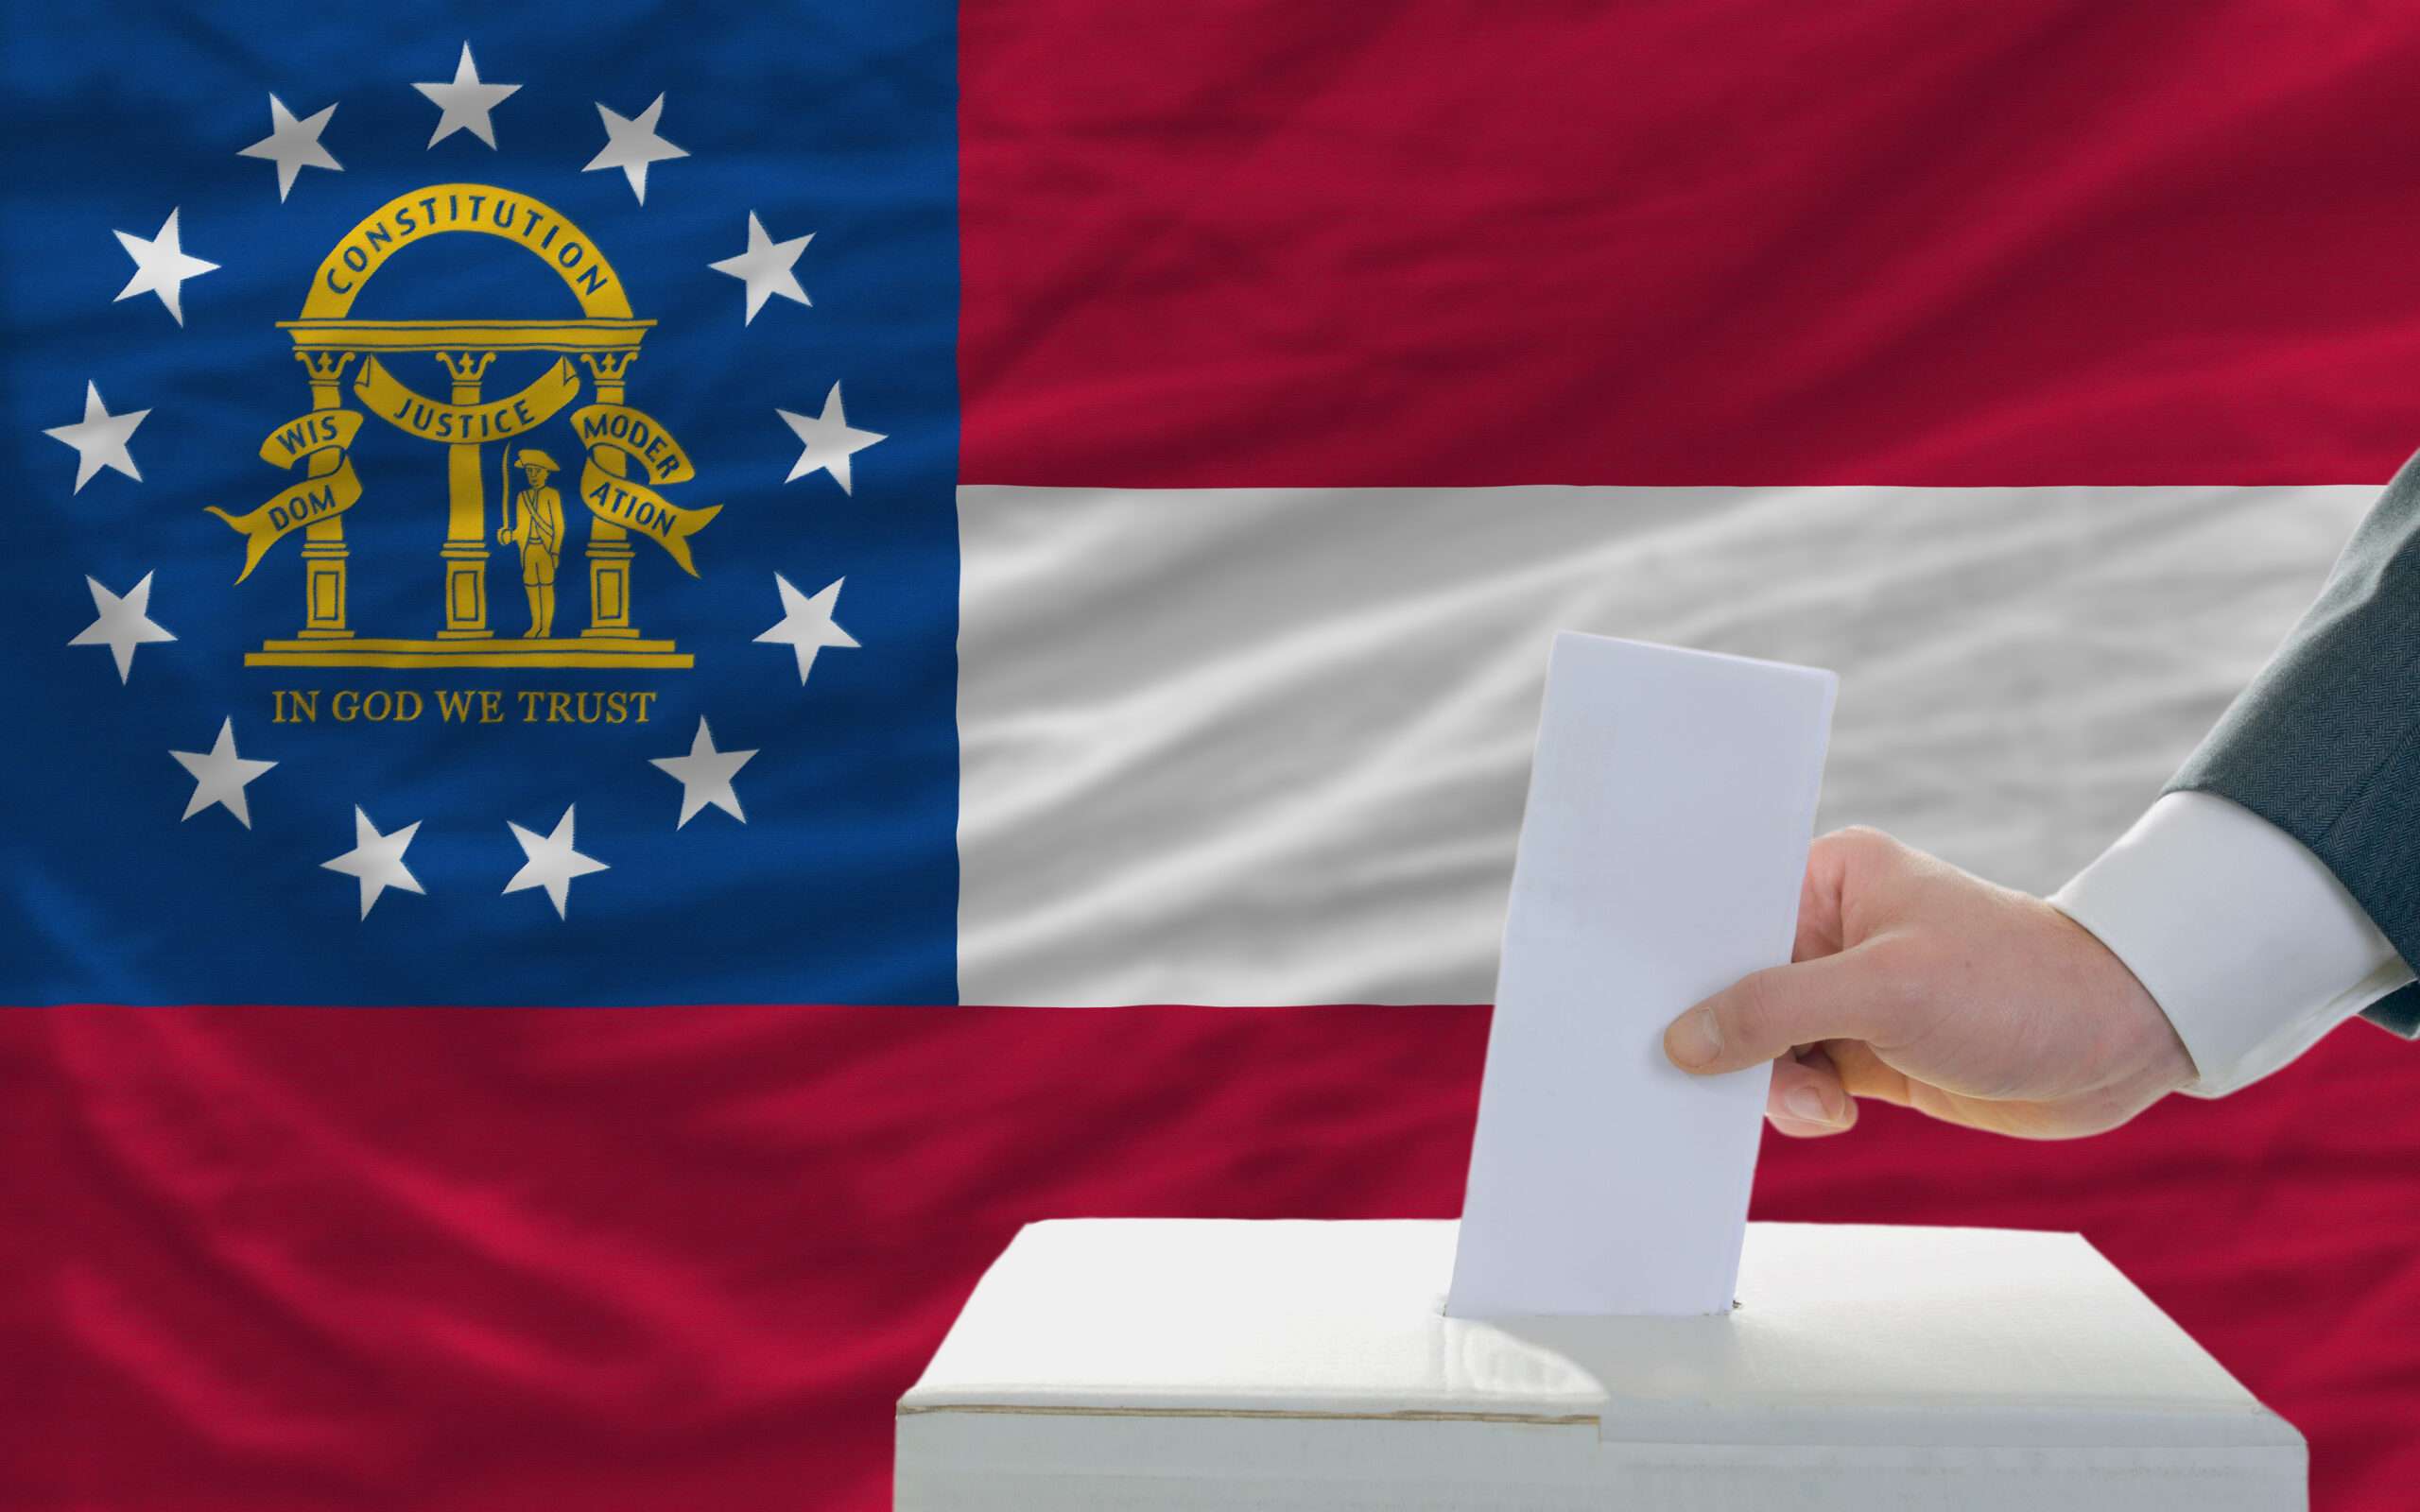 If Georgia's Election Law Was Supposed To Suppress the Vote, It Sure Did a Bad Job